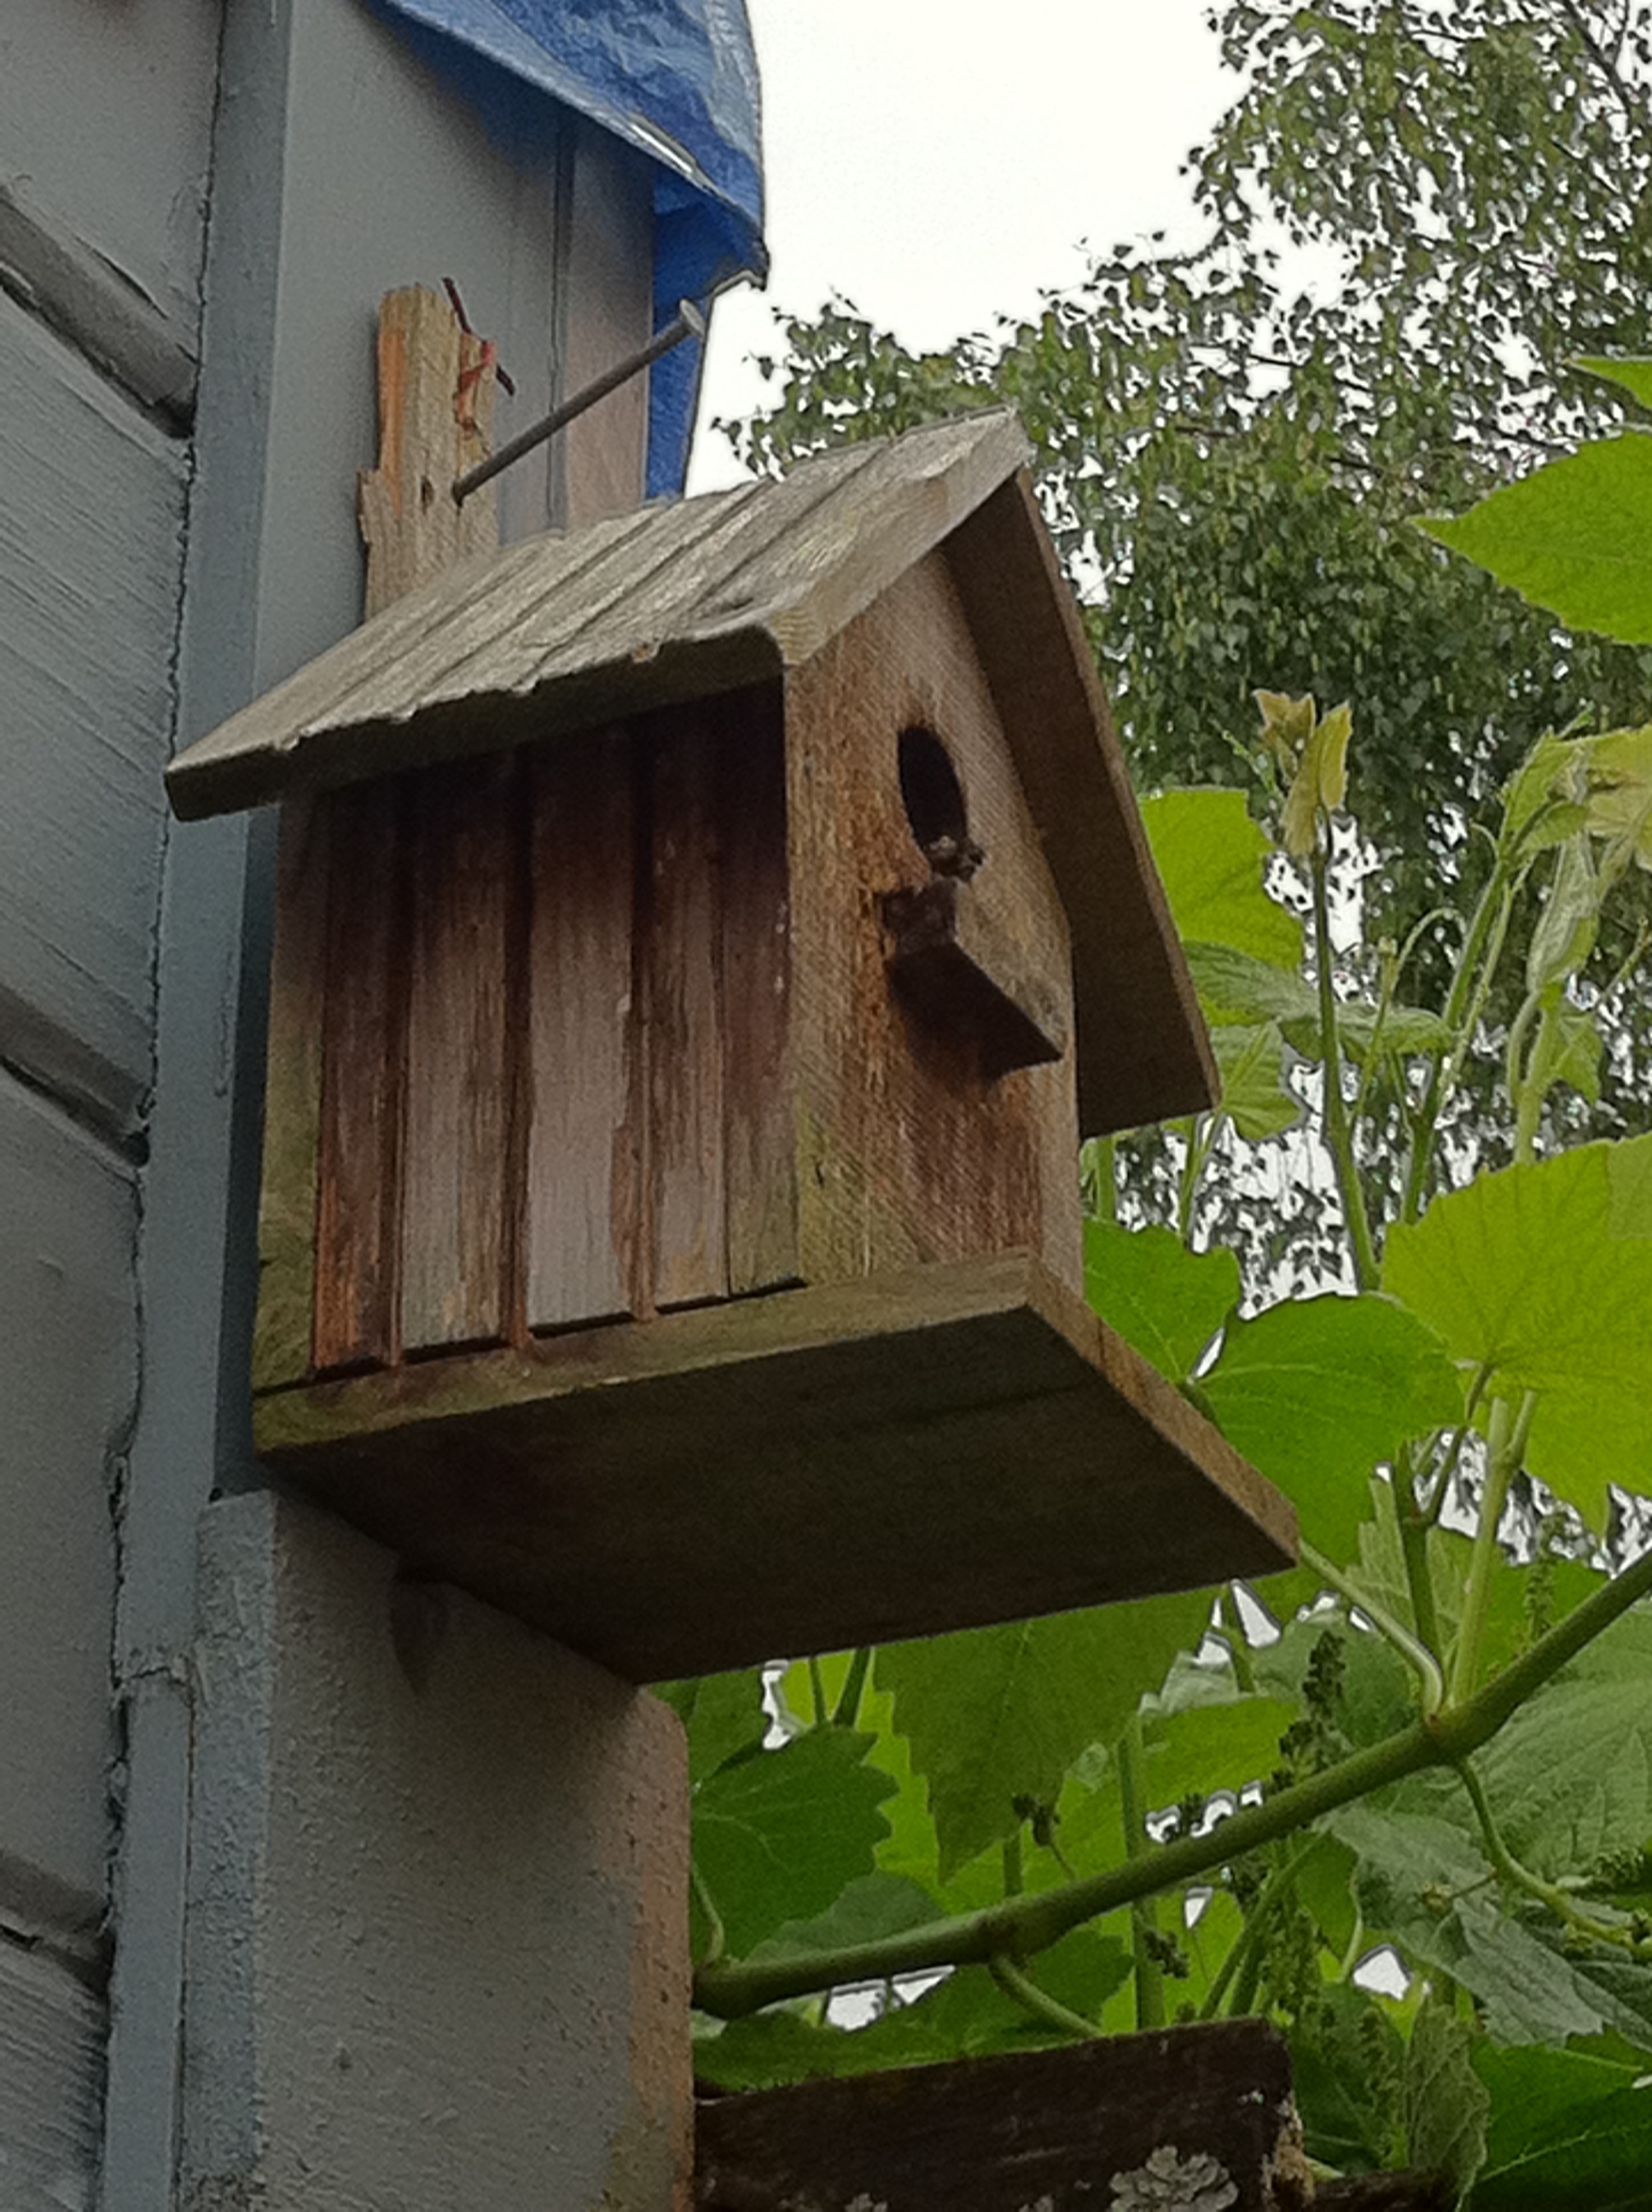 Bumble Bee Nest inside Bird House with Guard Bee